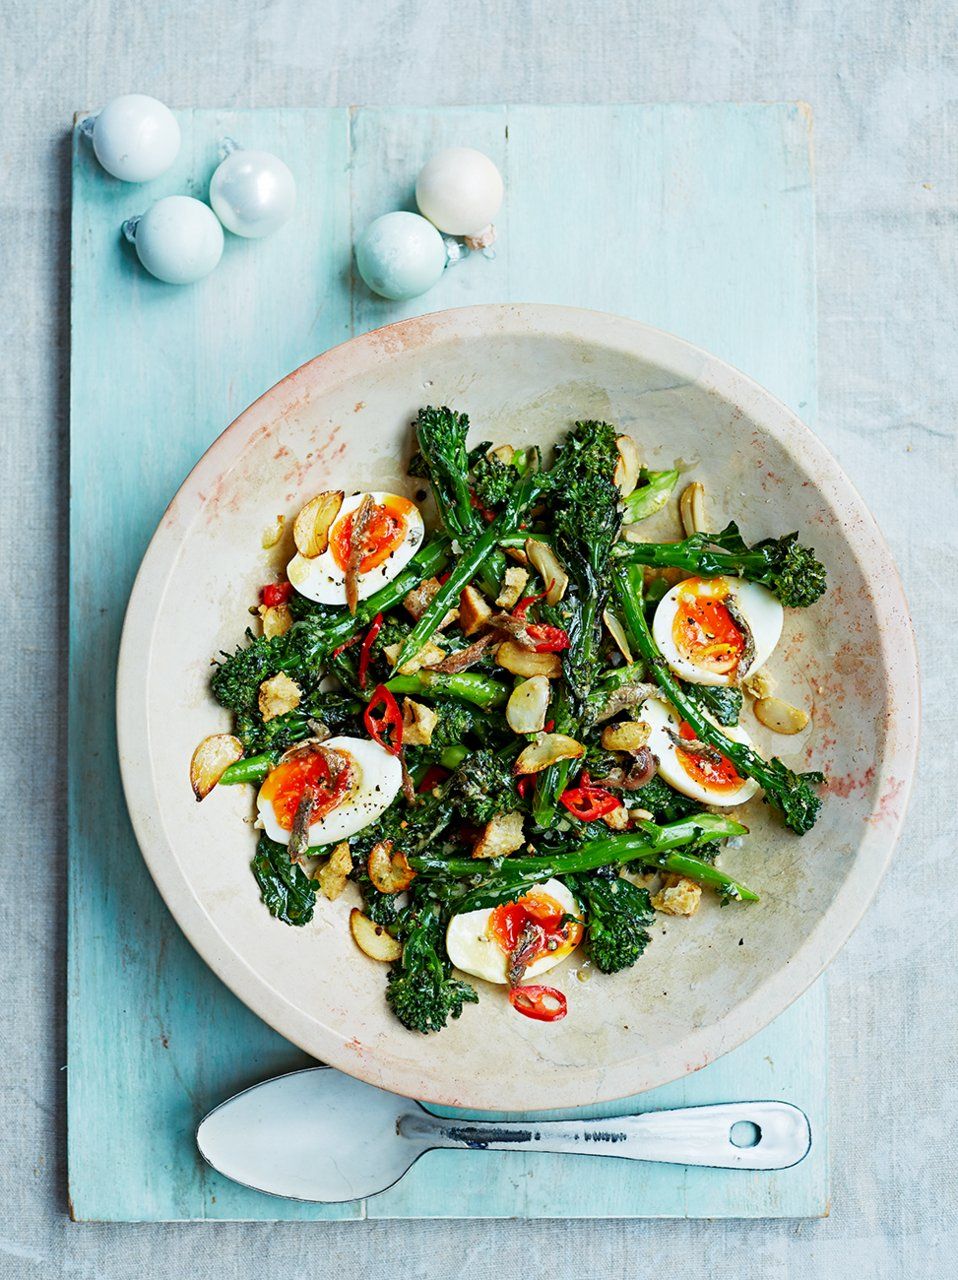 Broccoli & boiled egg salad with anchovies, chillis & croutons